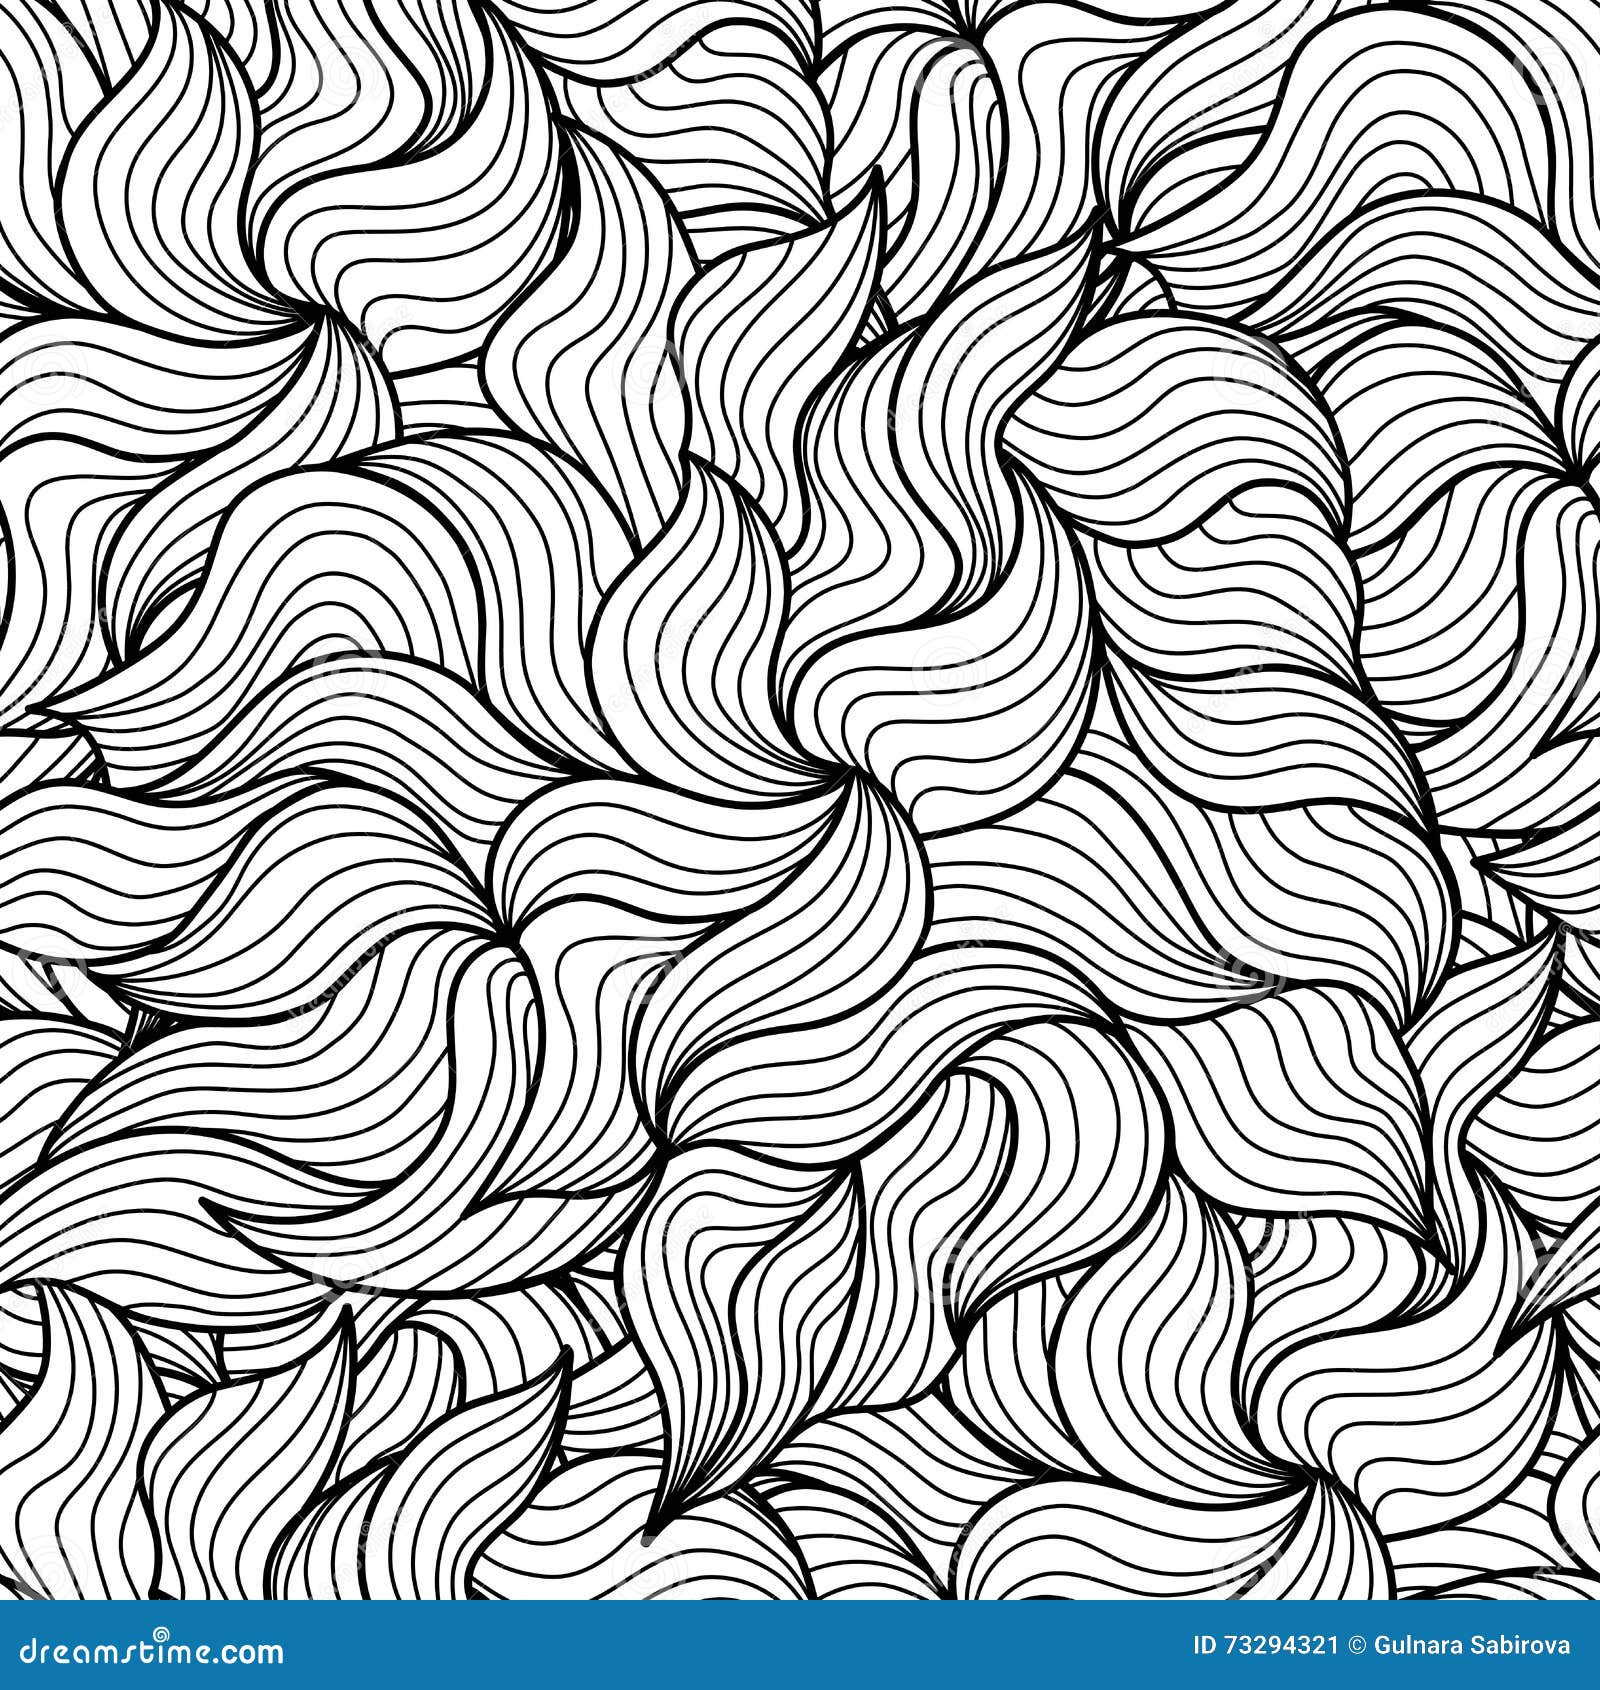 black and white waves seamless pattern.  hand drawn wavy background